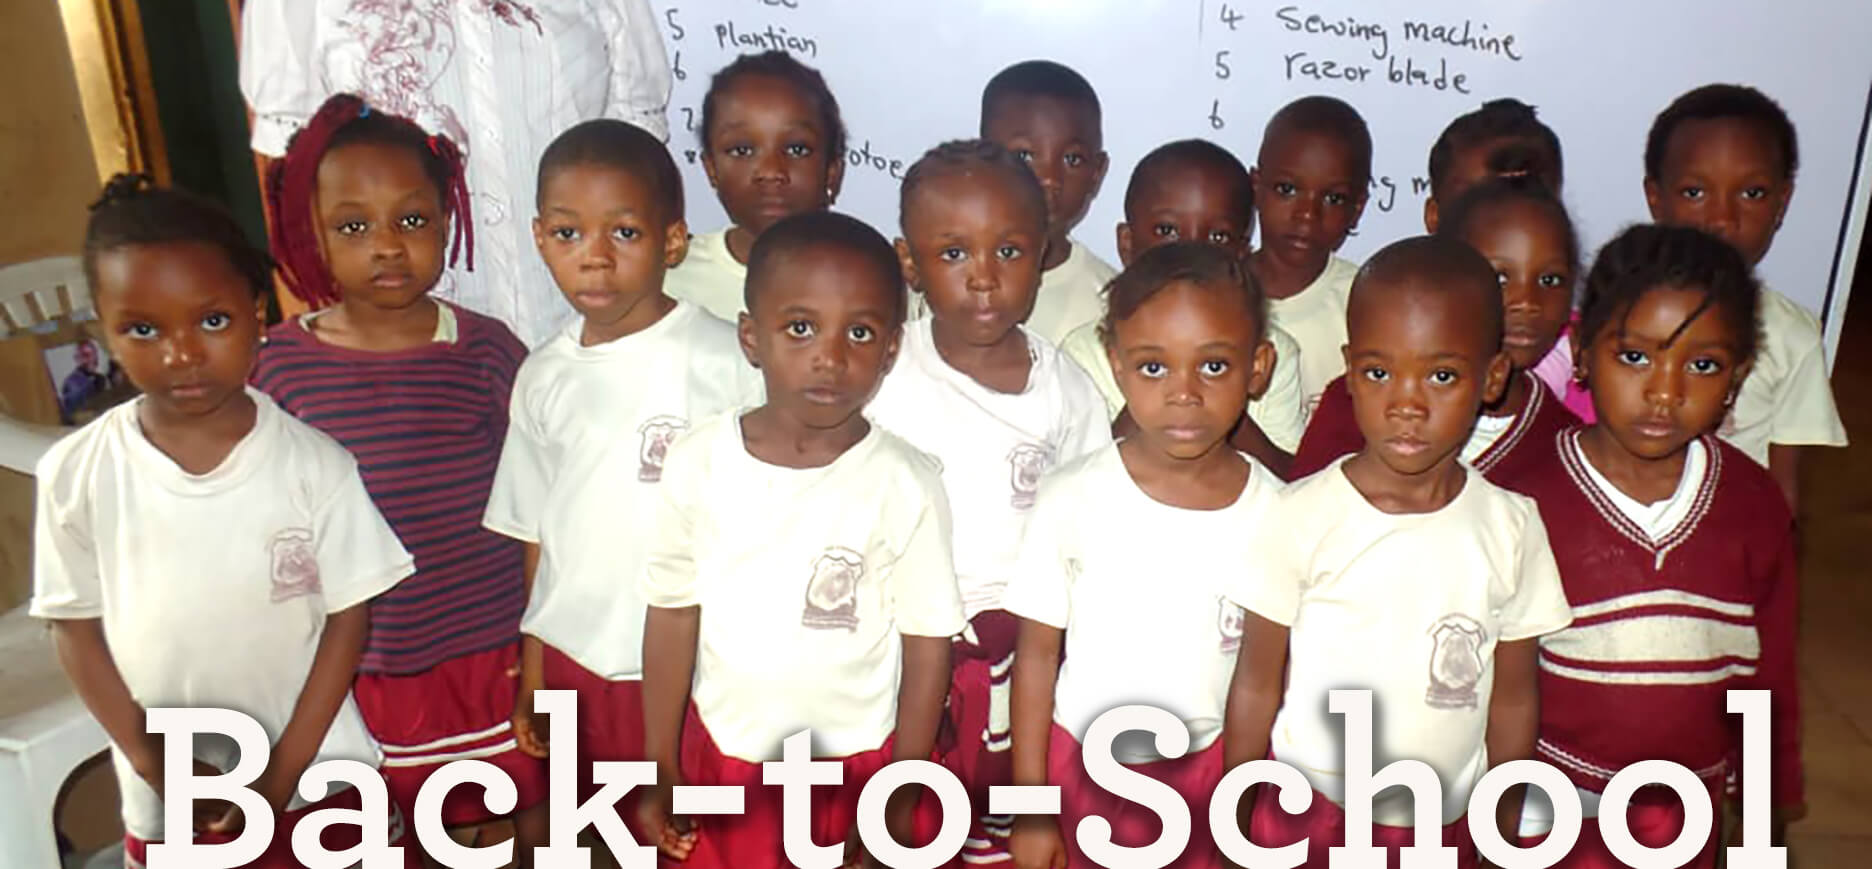 Back-to-School for Nigeria: Send Supplies & Change Lives